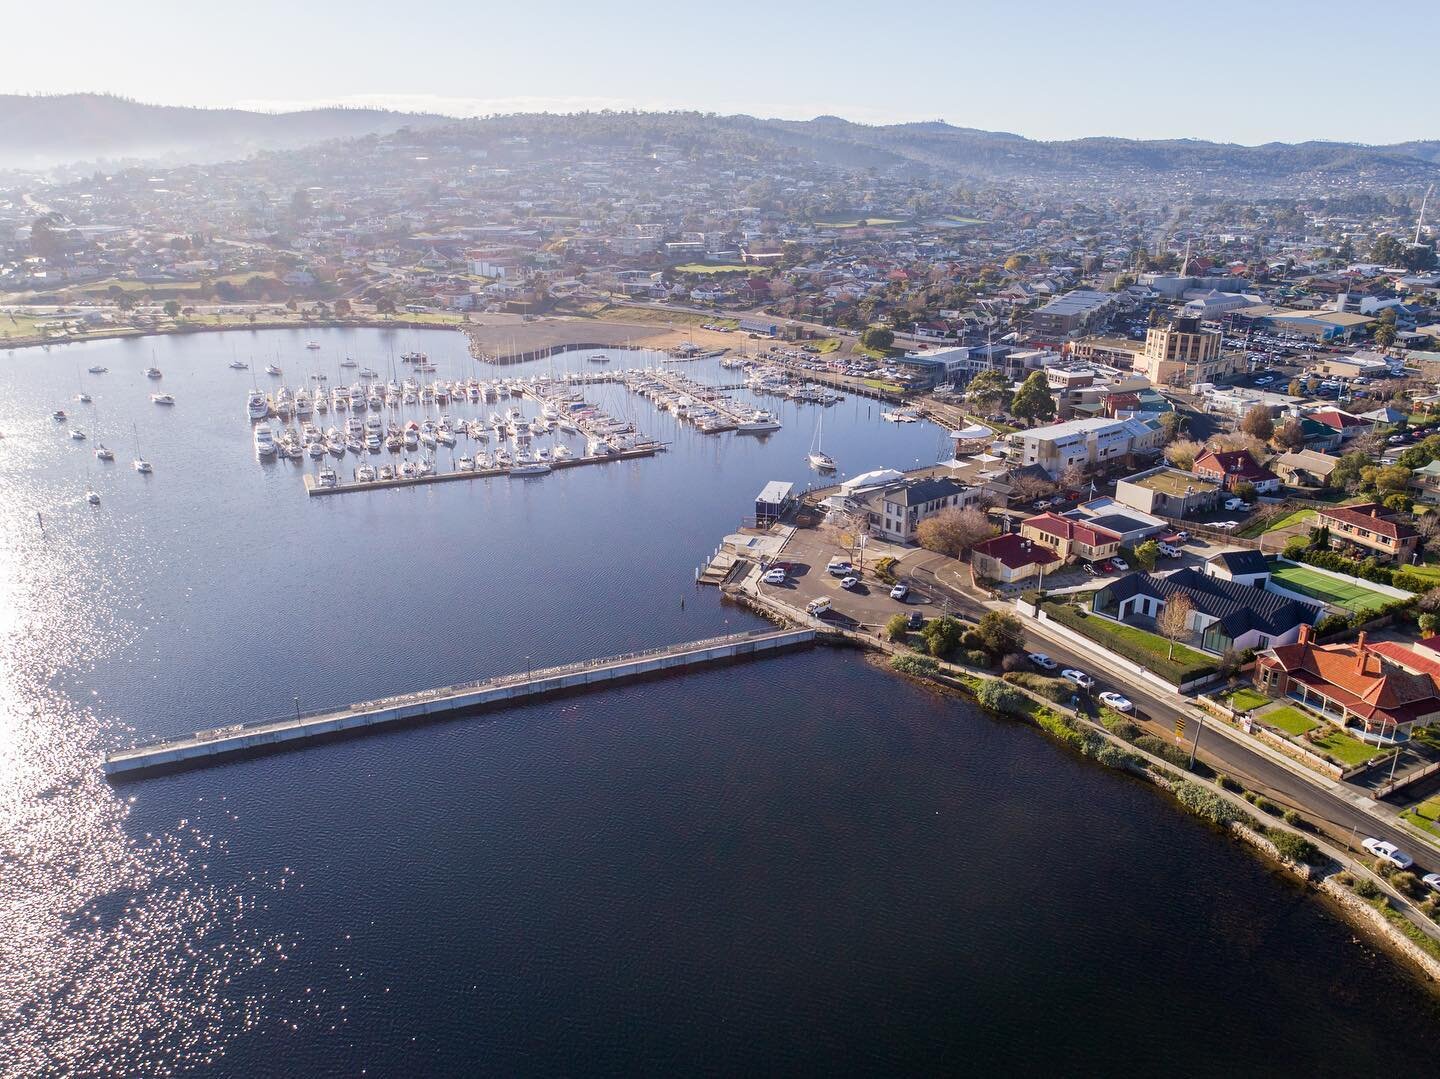 A stunning morning to take to the skies! We&rsquo;re currently working with a team of wonderful collaborators to deliver a vision for Victoria Esplanade in the City of Clarence, Tasmania. Jordan, our in house CASA certified remote pilot, has been con